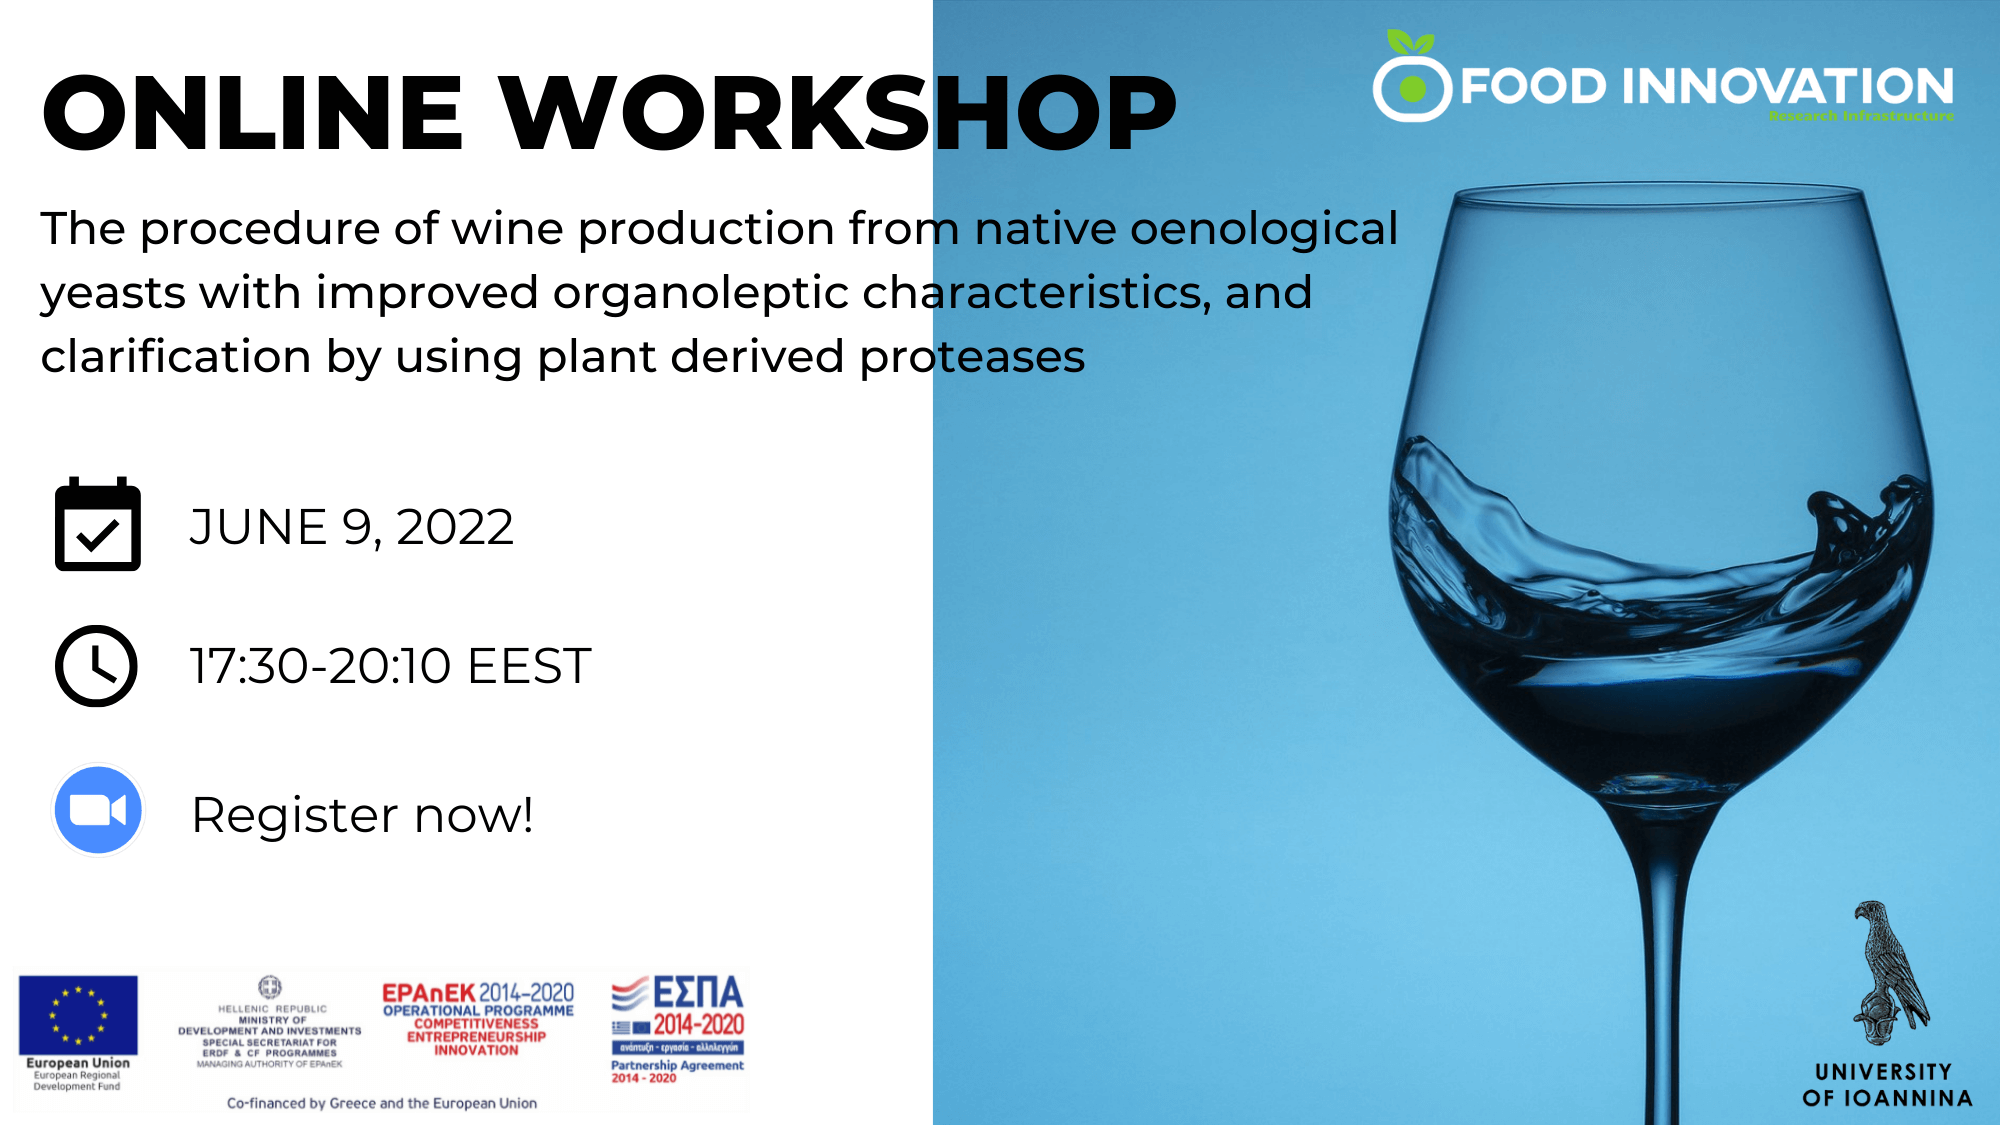 An online workshop on the procedure of wine production from native oenological yeasts with improved organoleptic characteristics, and clarification by using plant derived proteases